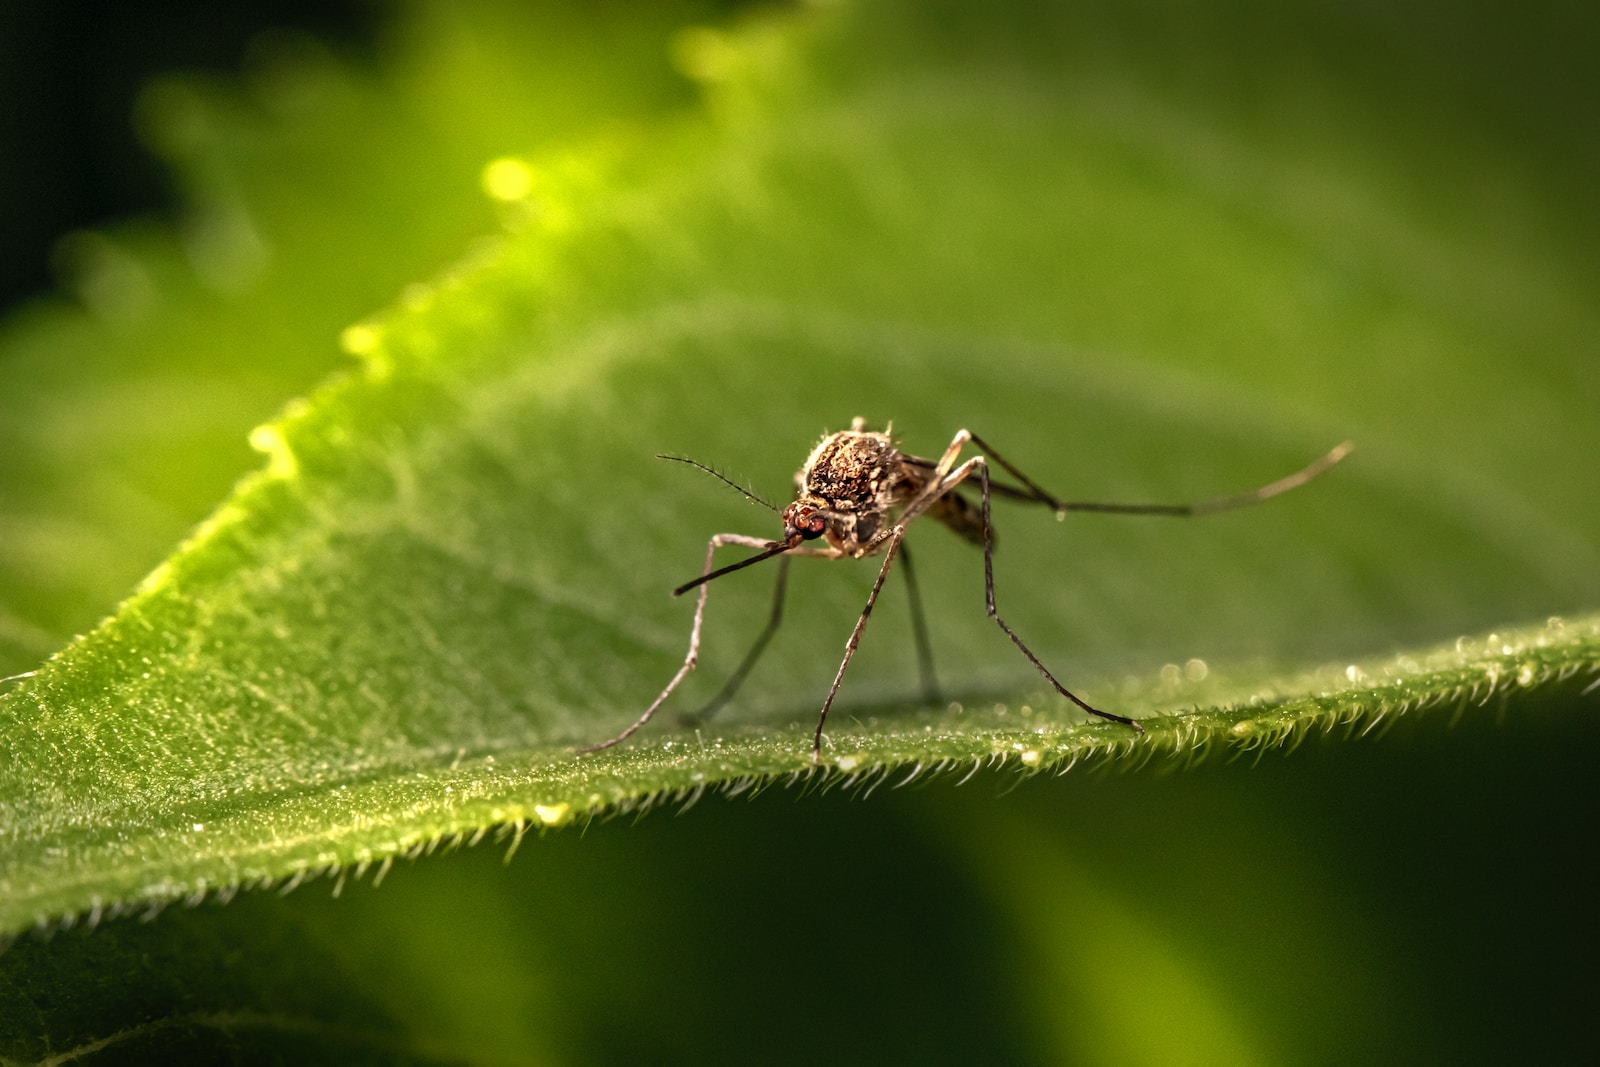 a close up of a mosquito on a leaf